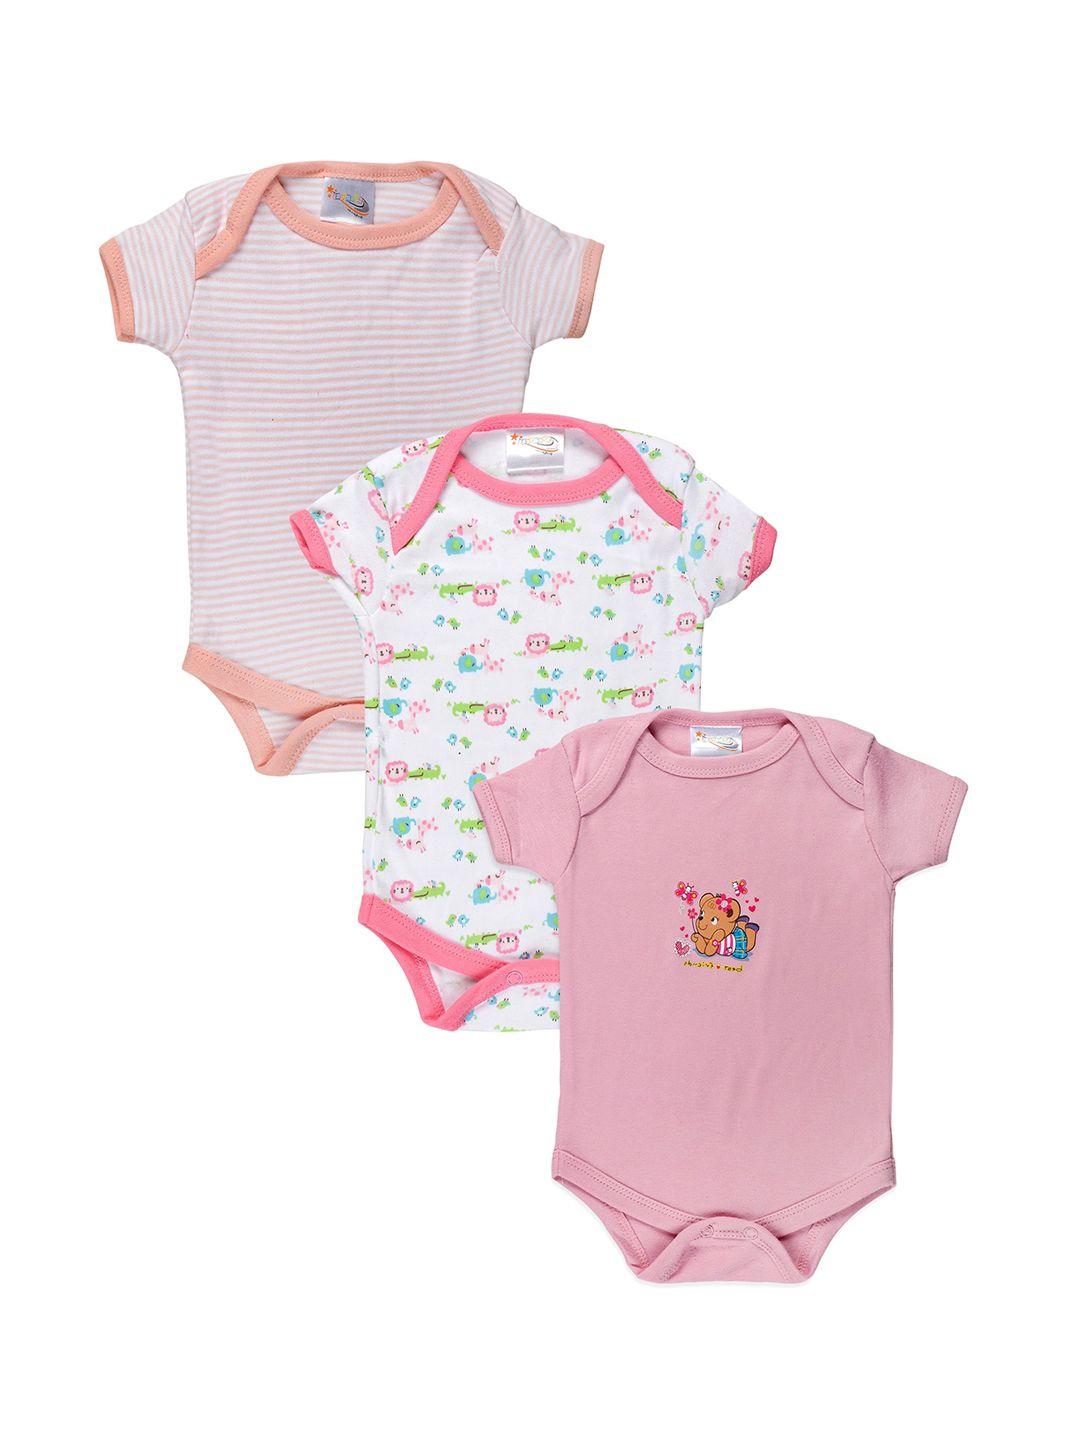 STARTERS Kids Set of 3 Printed Cotton Rompers